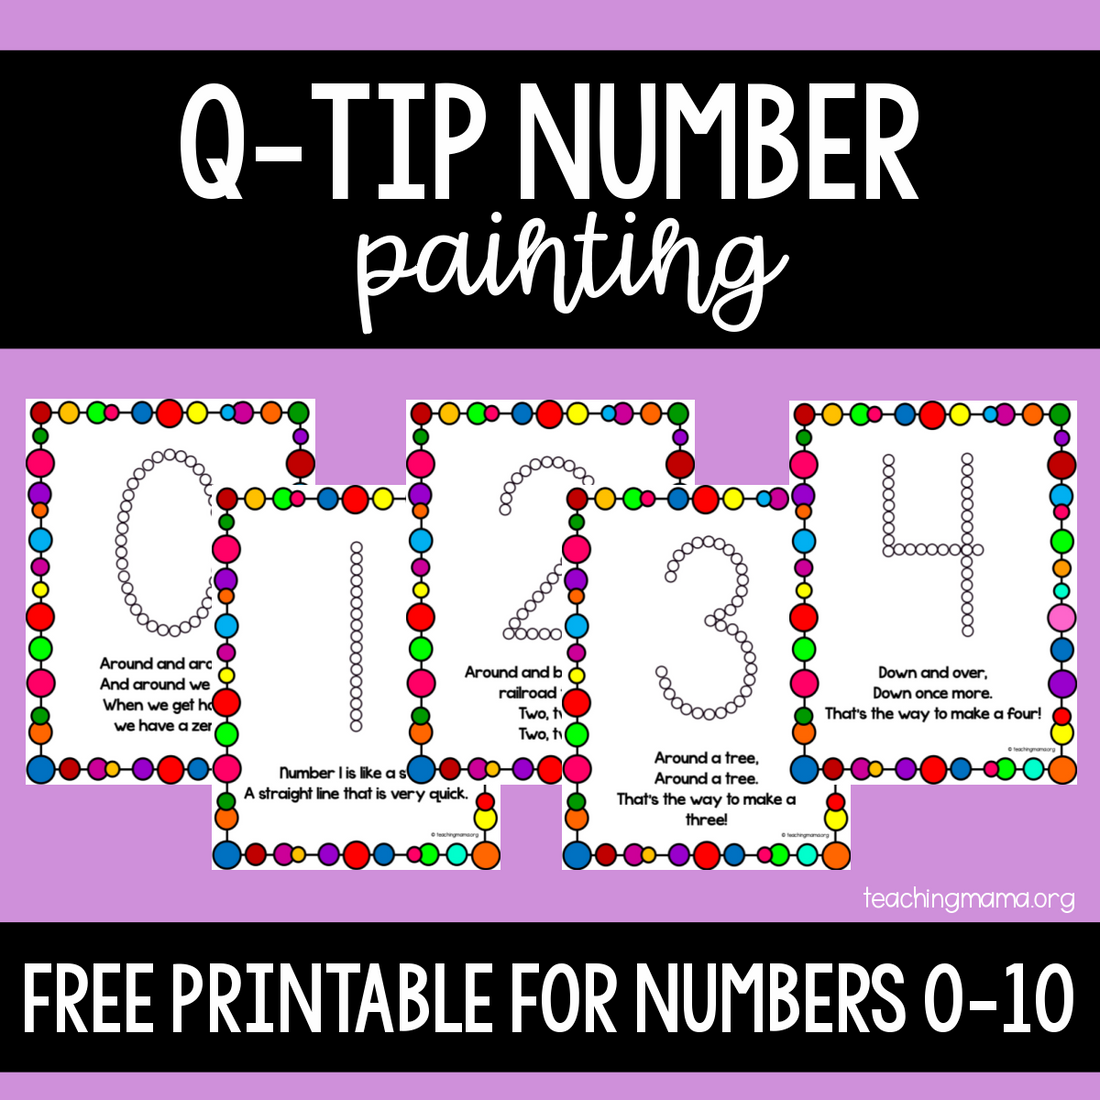 Q-Tip Number Painting Activity